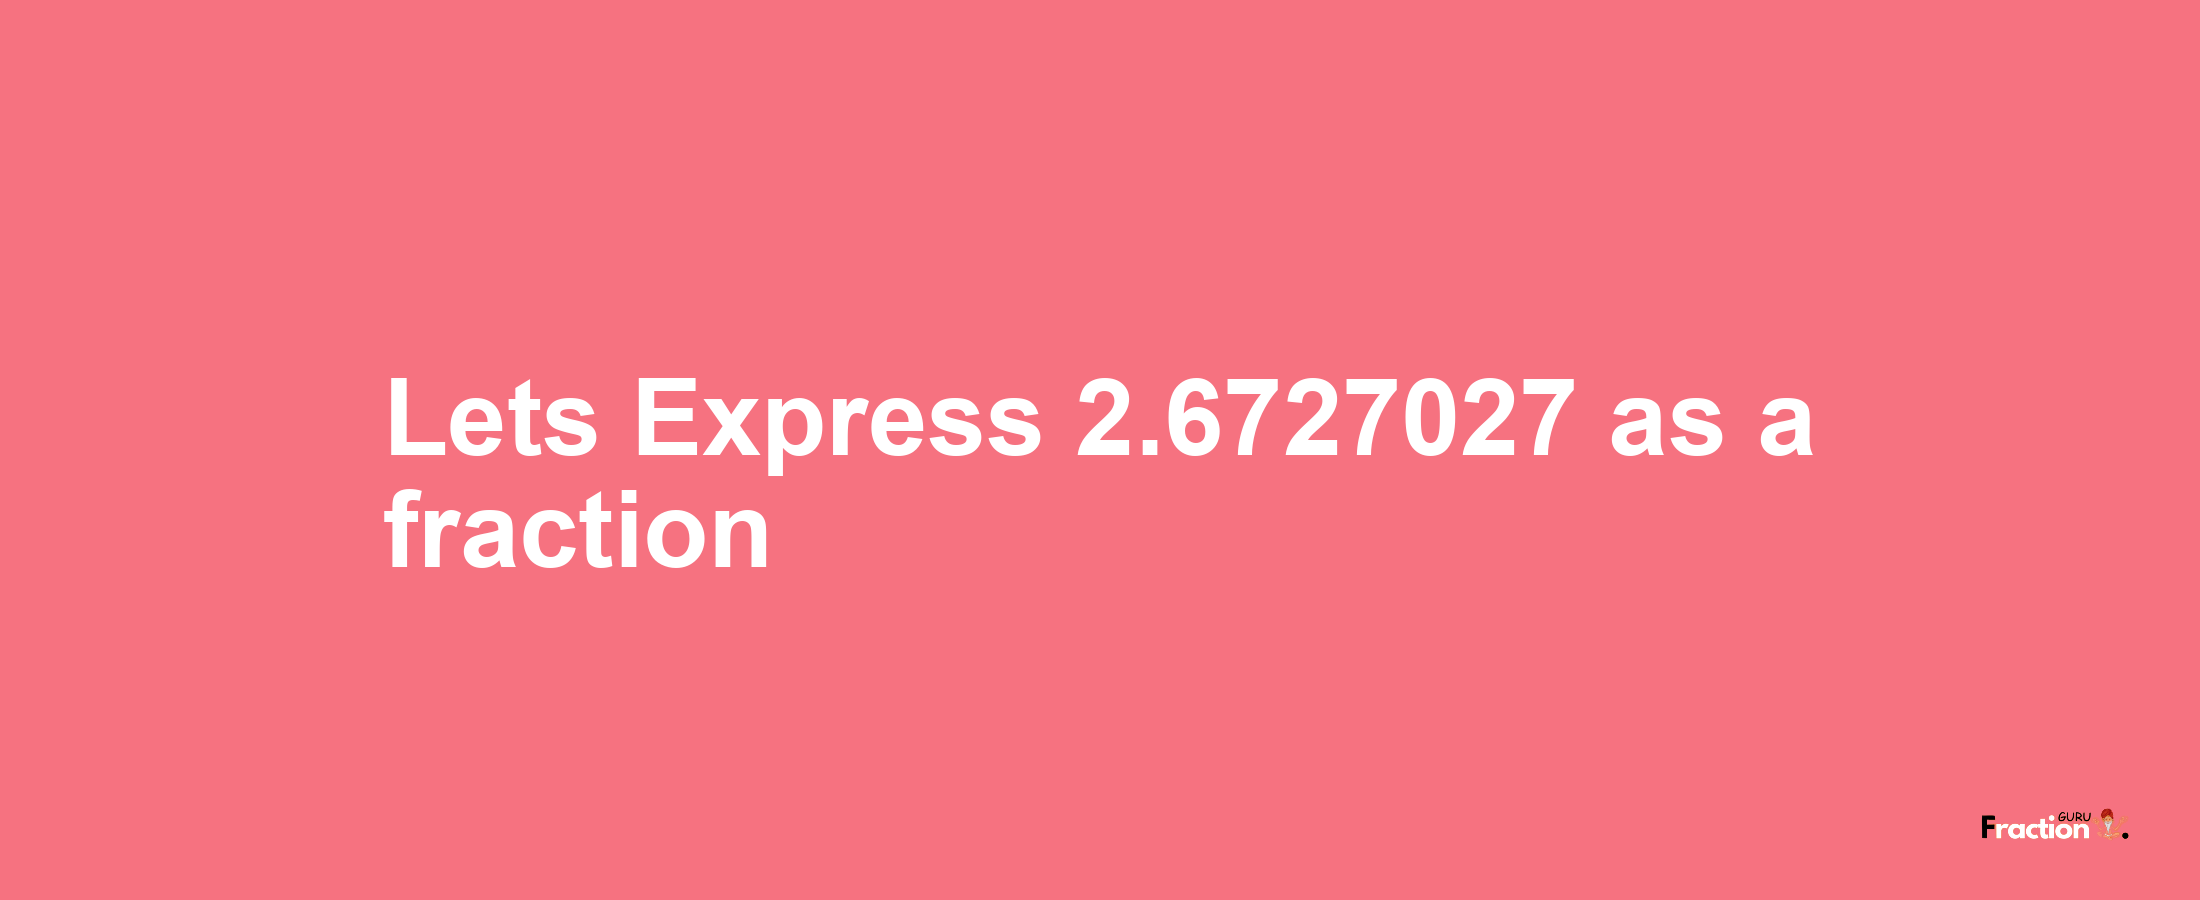 Lets Express 2.6727027 as afraction